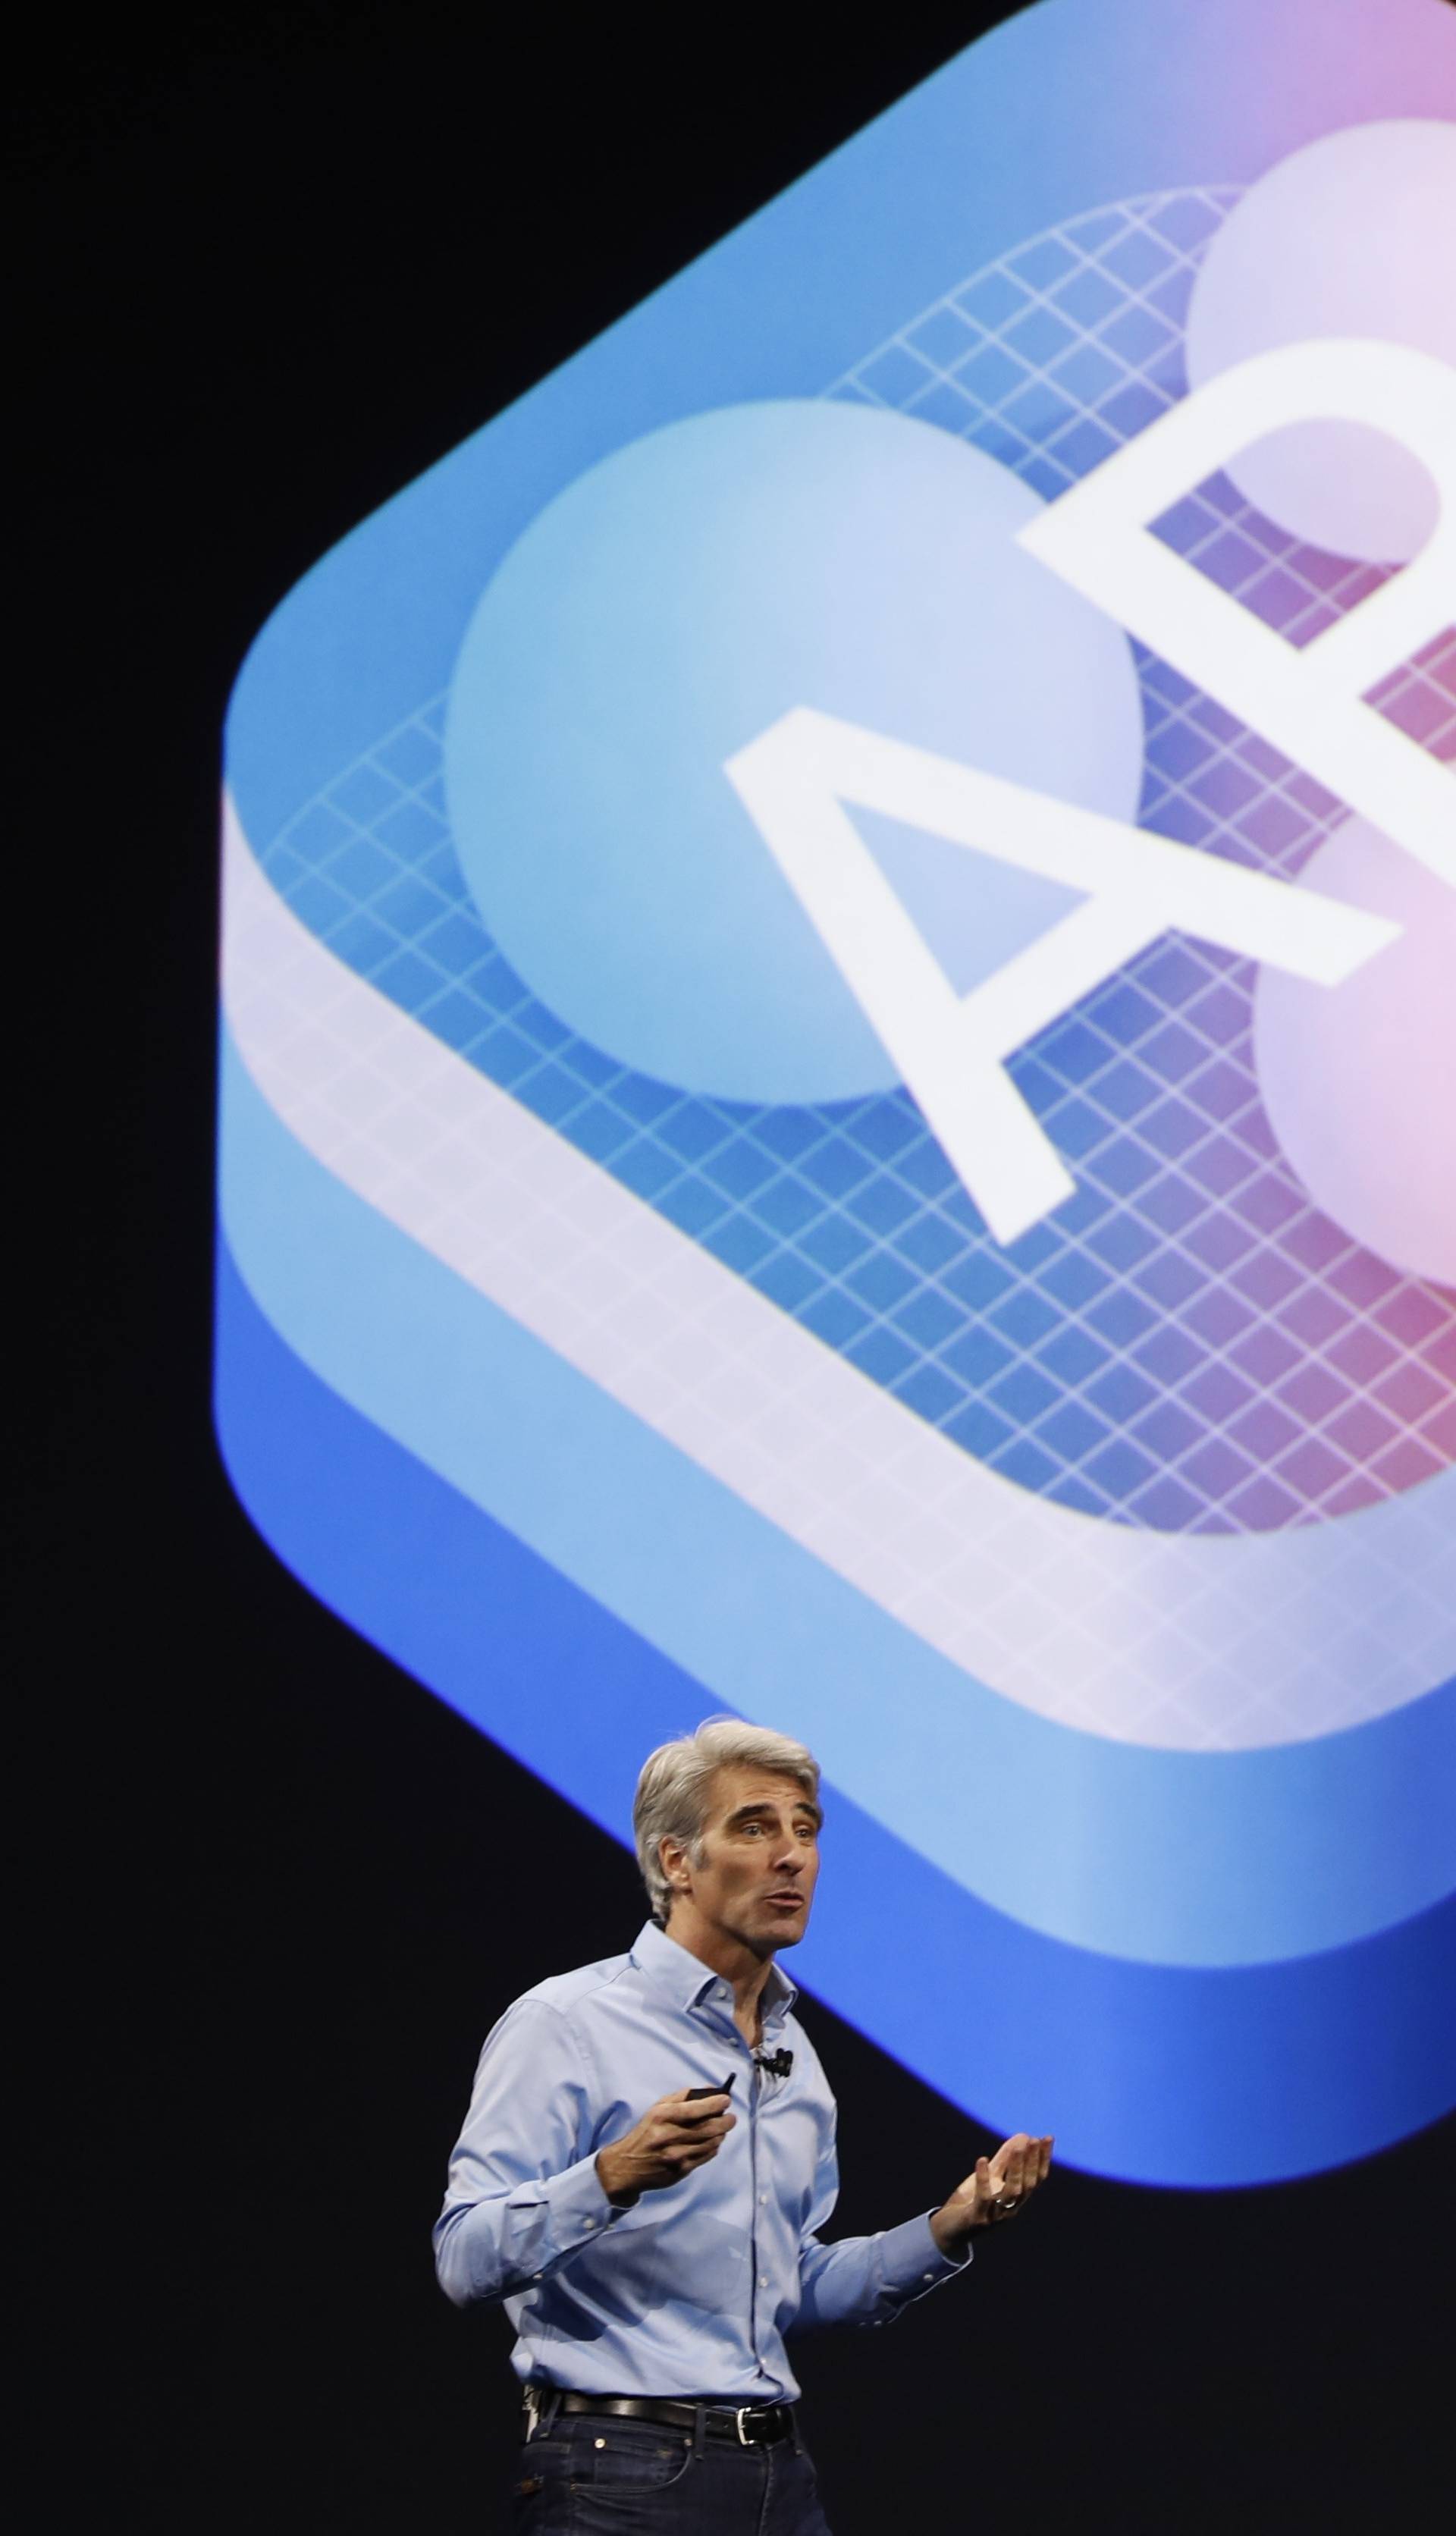 Craig Federighi, Senior Vice President Software Engineering speaks during Apple's annual world wide developer conference (WWDC) in San Jose